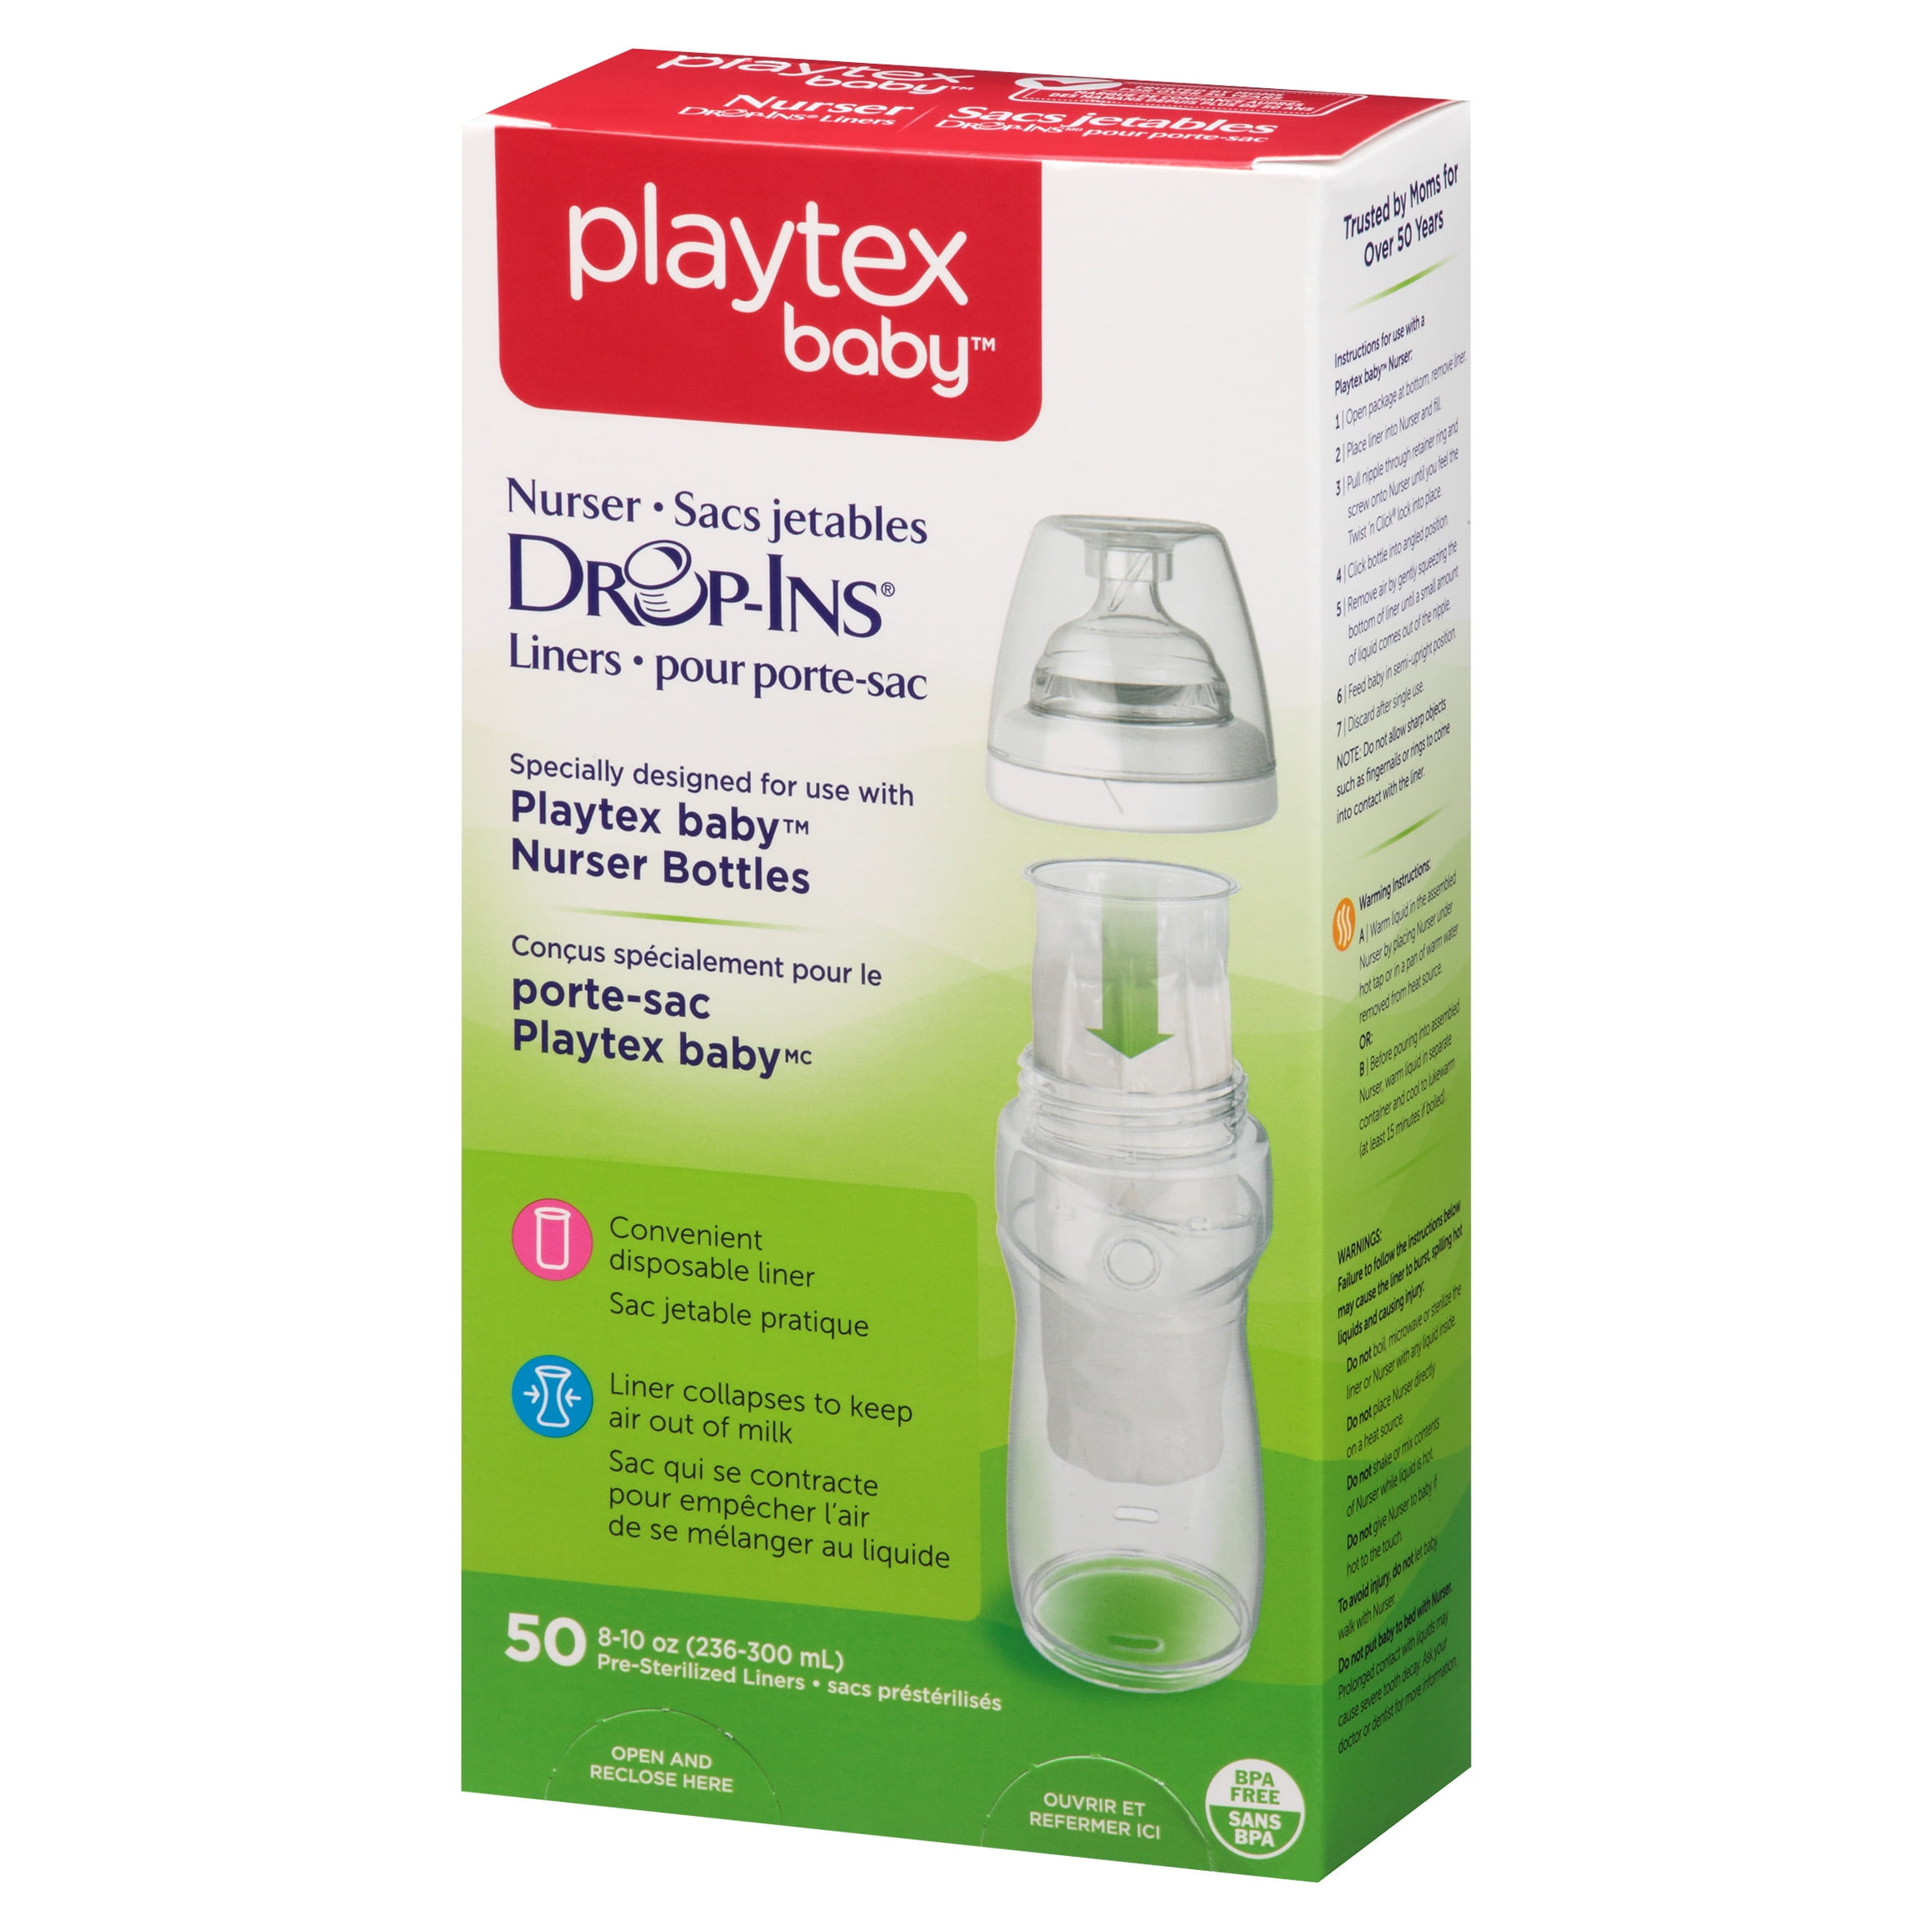 Playtex Nurser Bottle Liners Drop-Ins Free Shipping. 100 Count 8-10 oz New 